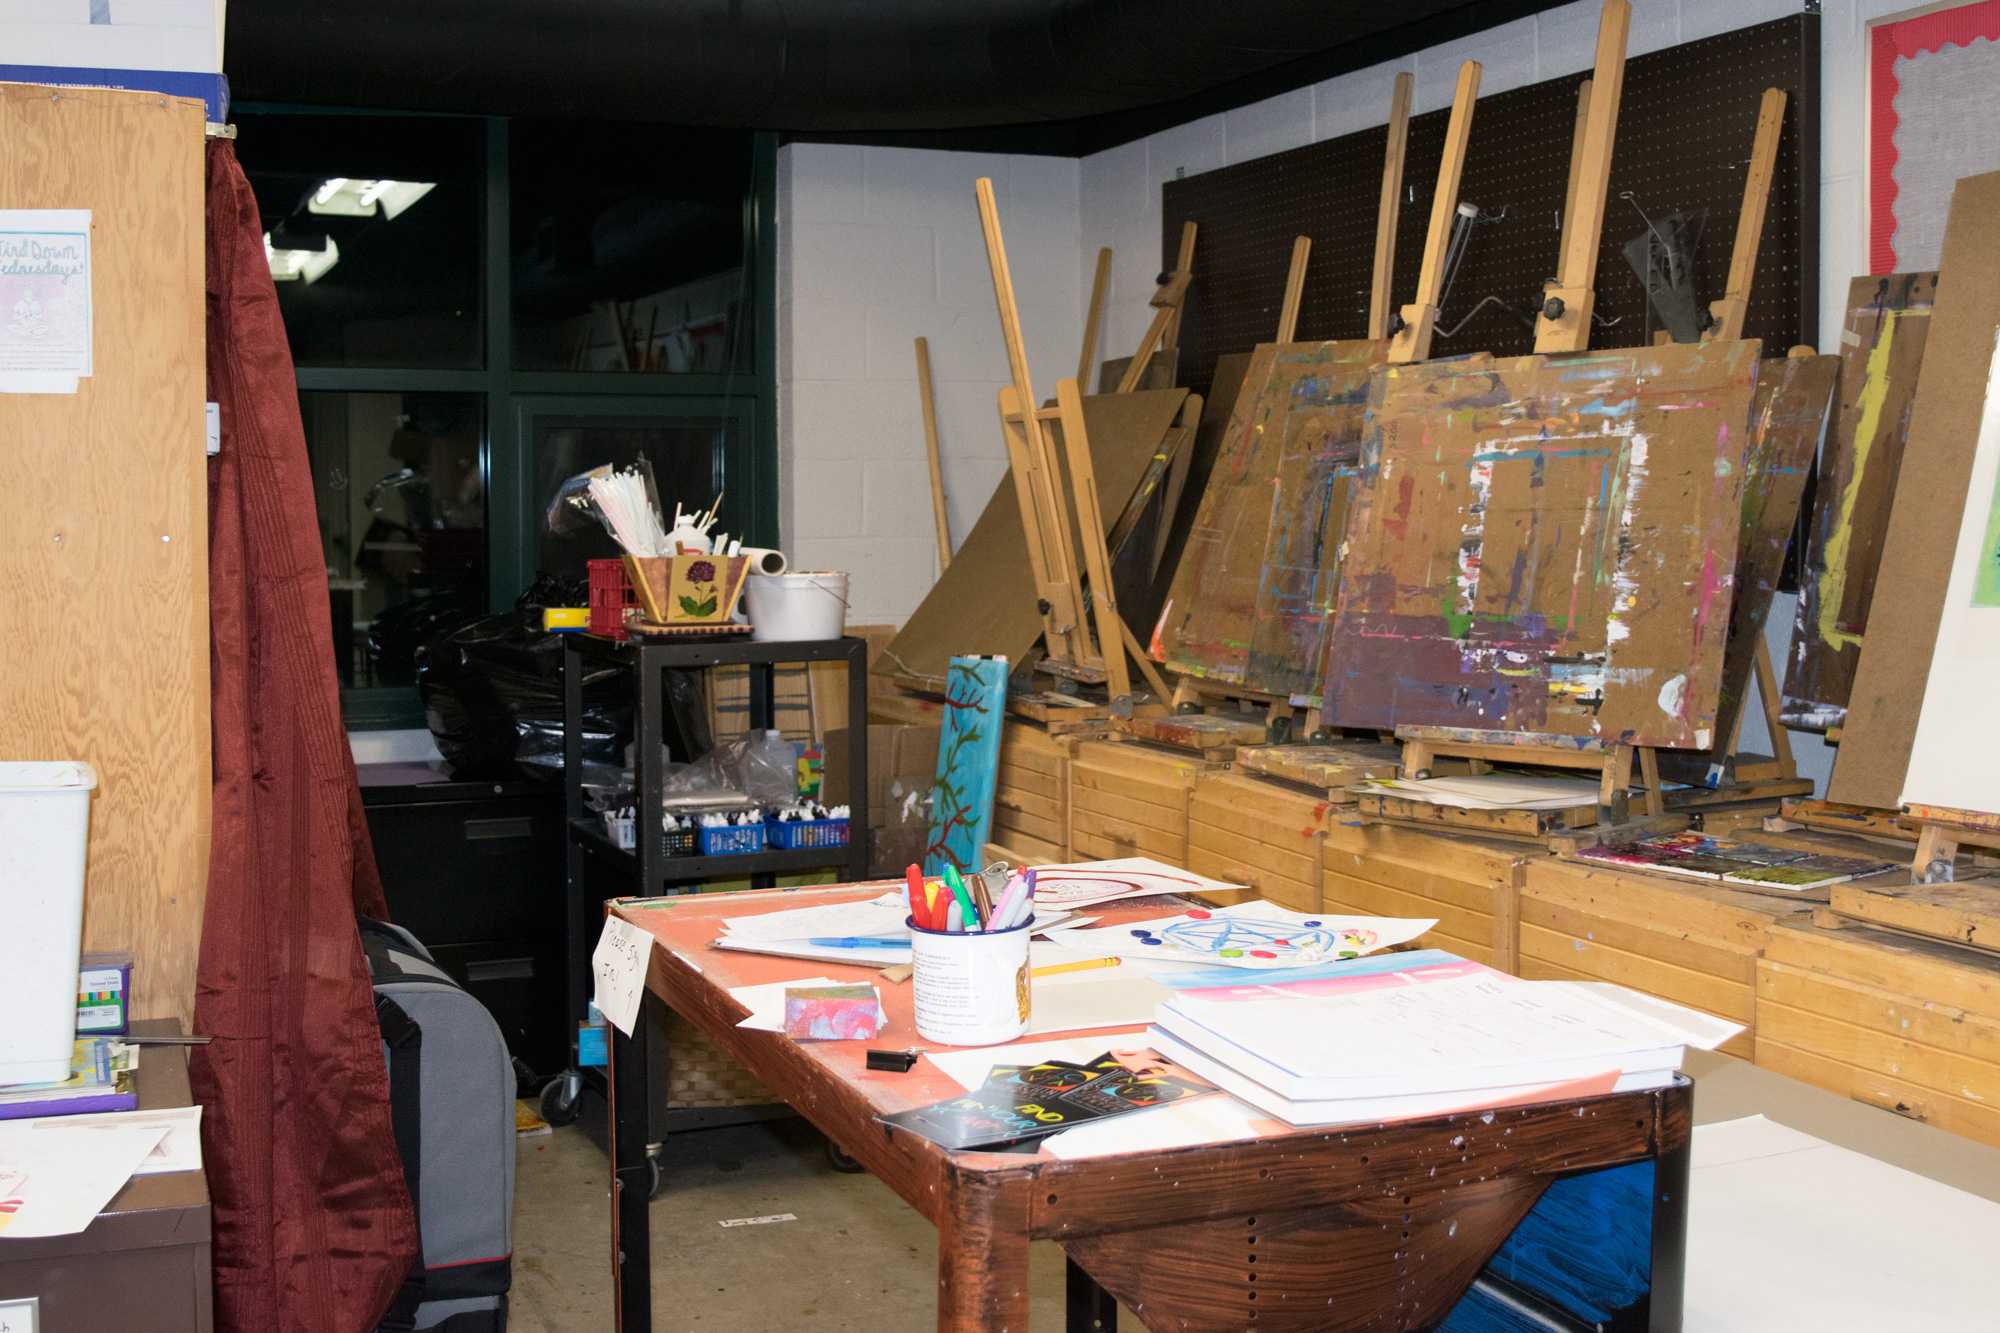 Canvases and easels await use at the Turchins art studio.